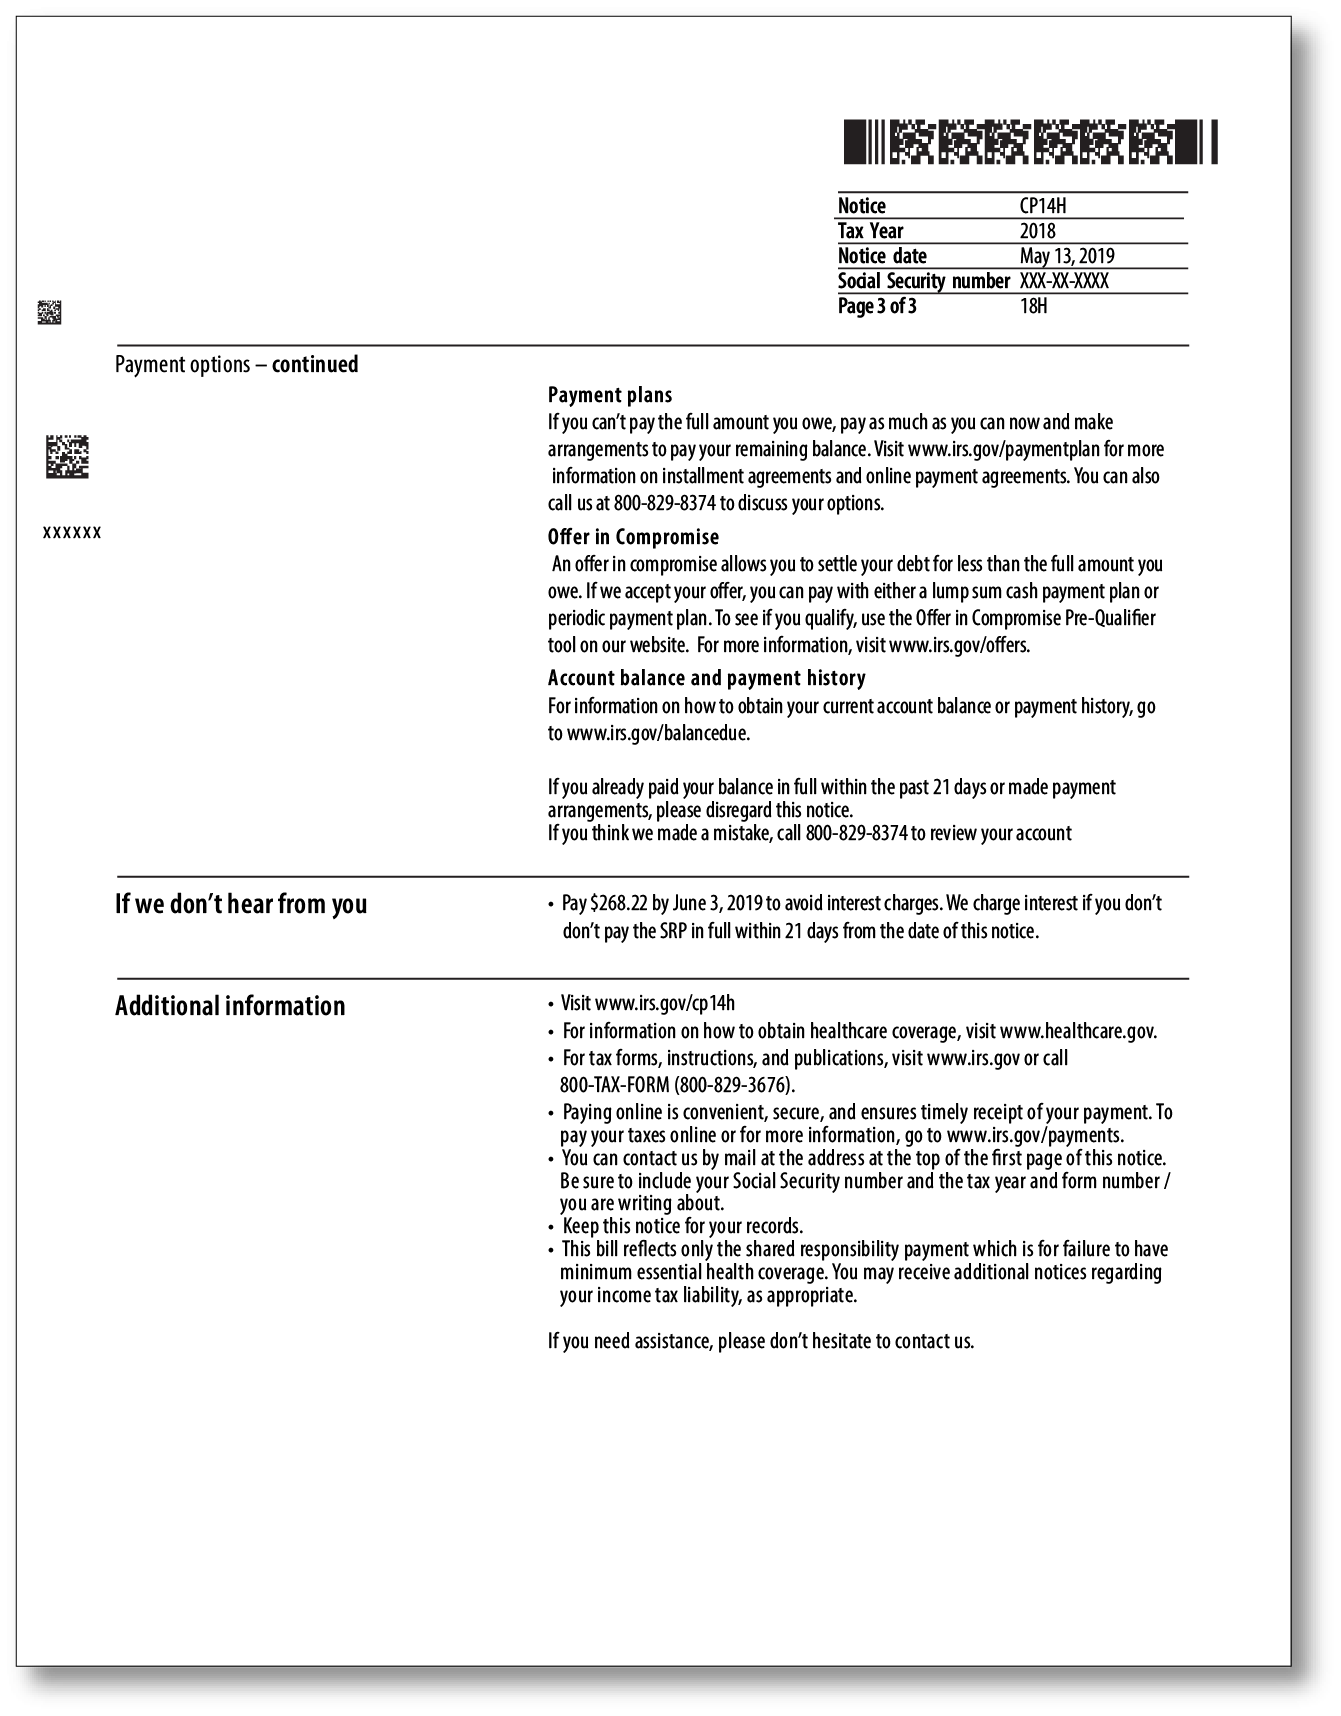 IRS Audit Letter CP14H – Sample 1